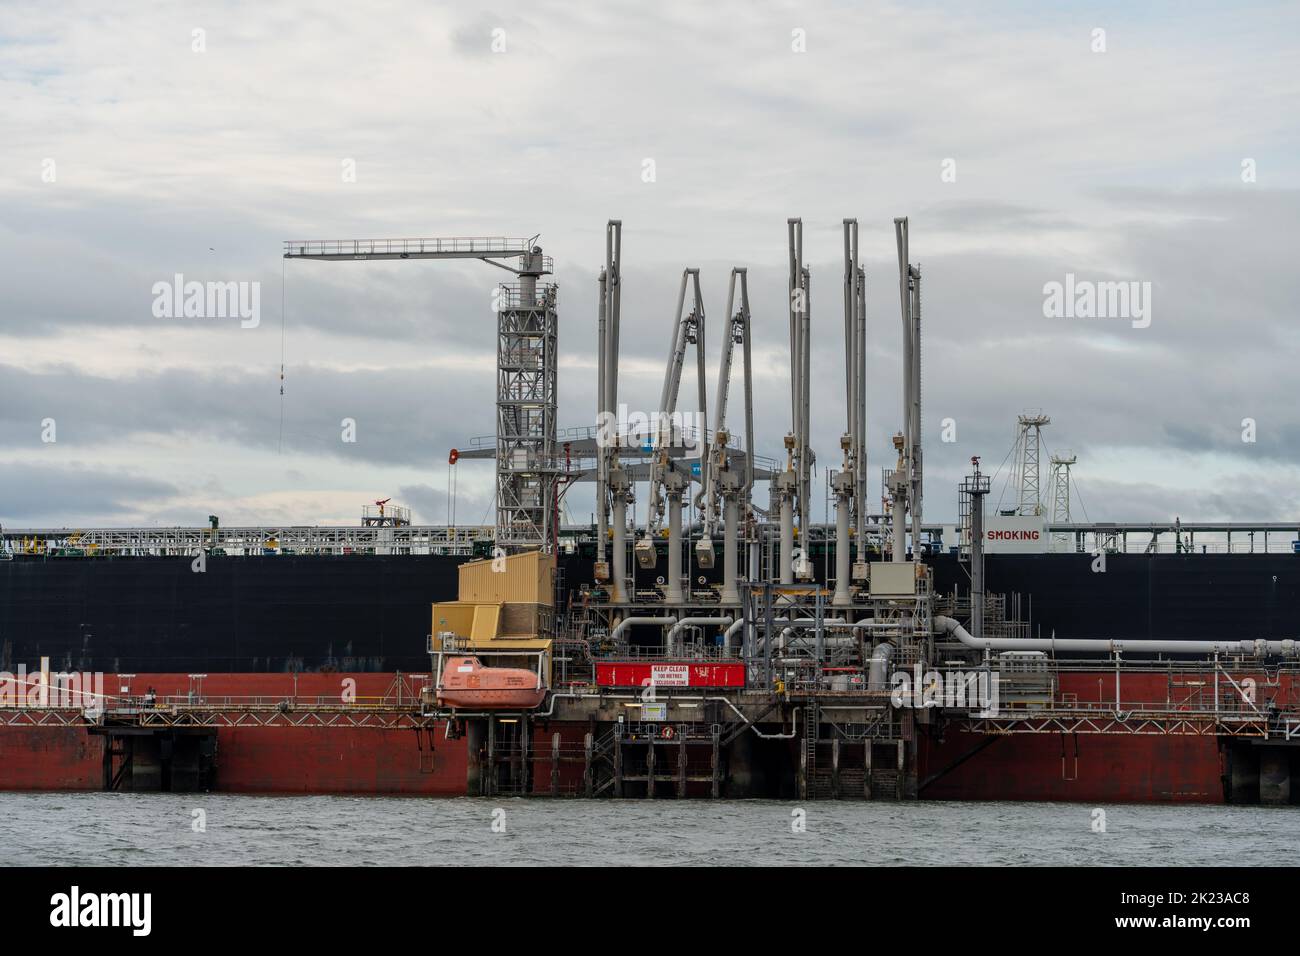 A tanker at Hound Point oil terminal, east of the Forth Bridge on the Firth of Forth, Scotland, UK. Stock Photo